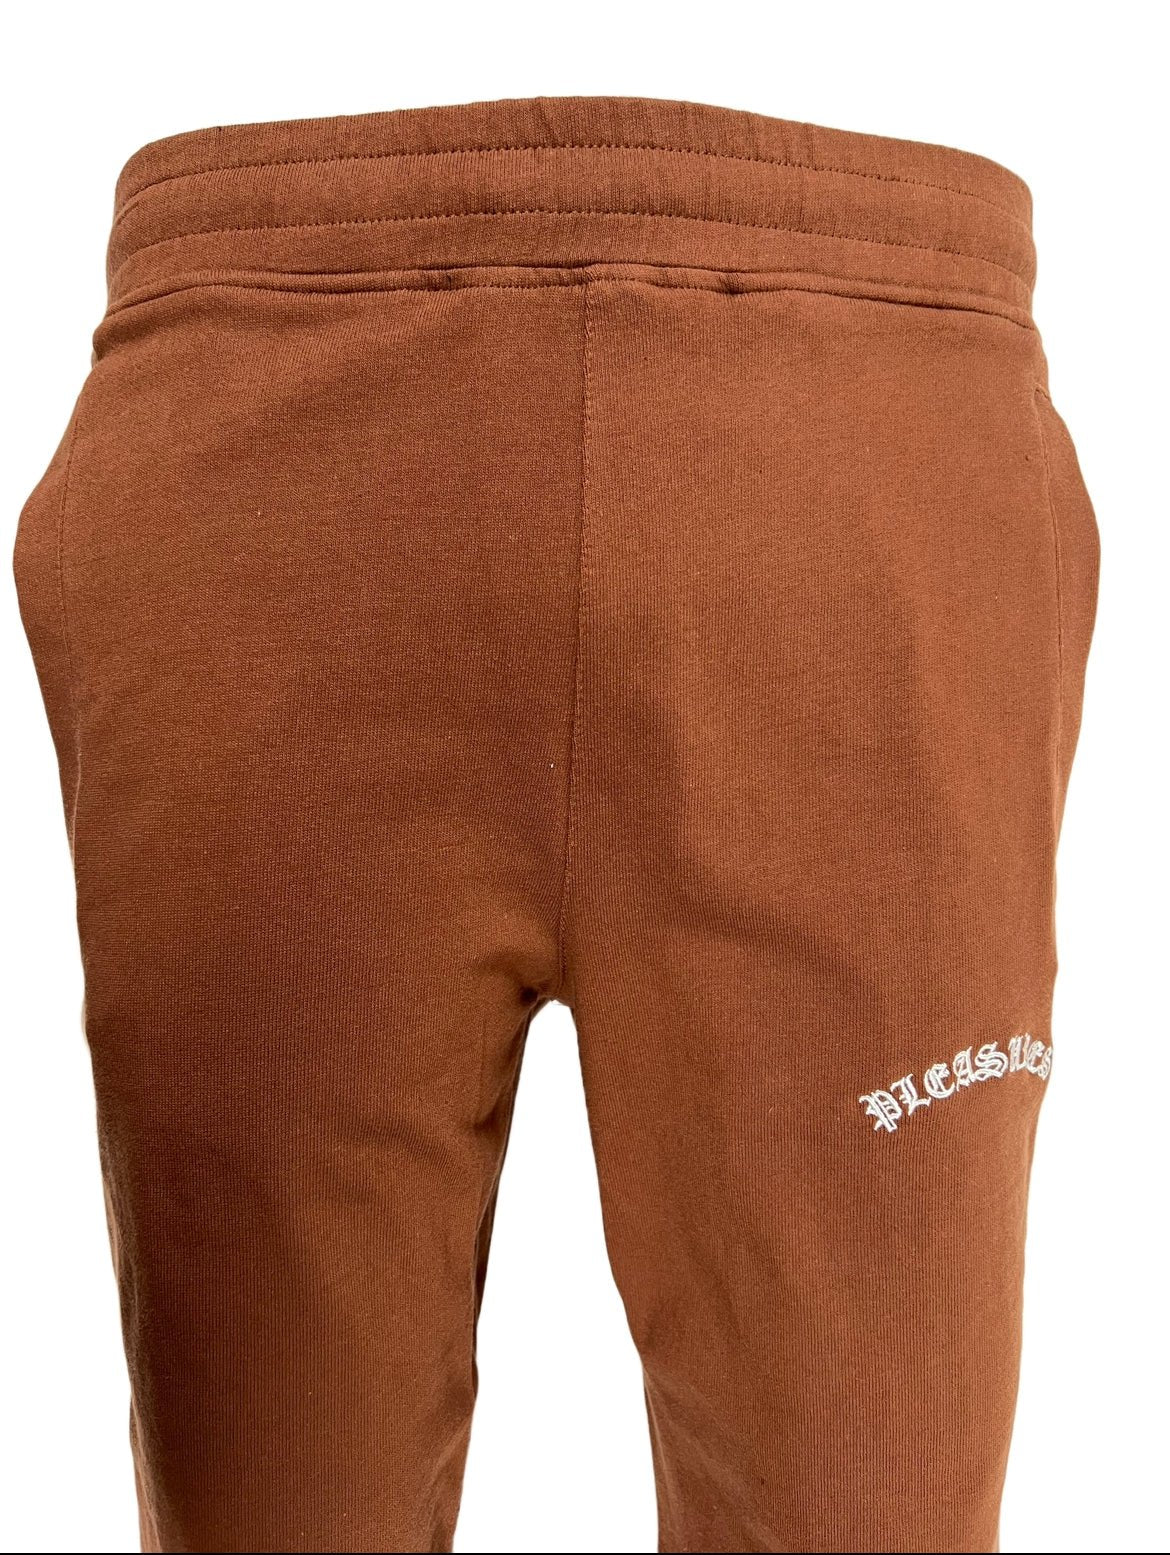 A PLEASURES brown cotton pants with white embroidered leg branding on it.